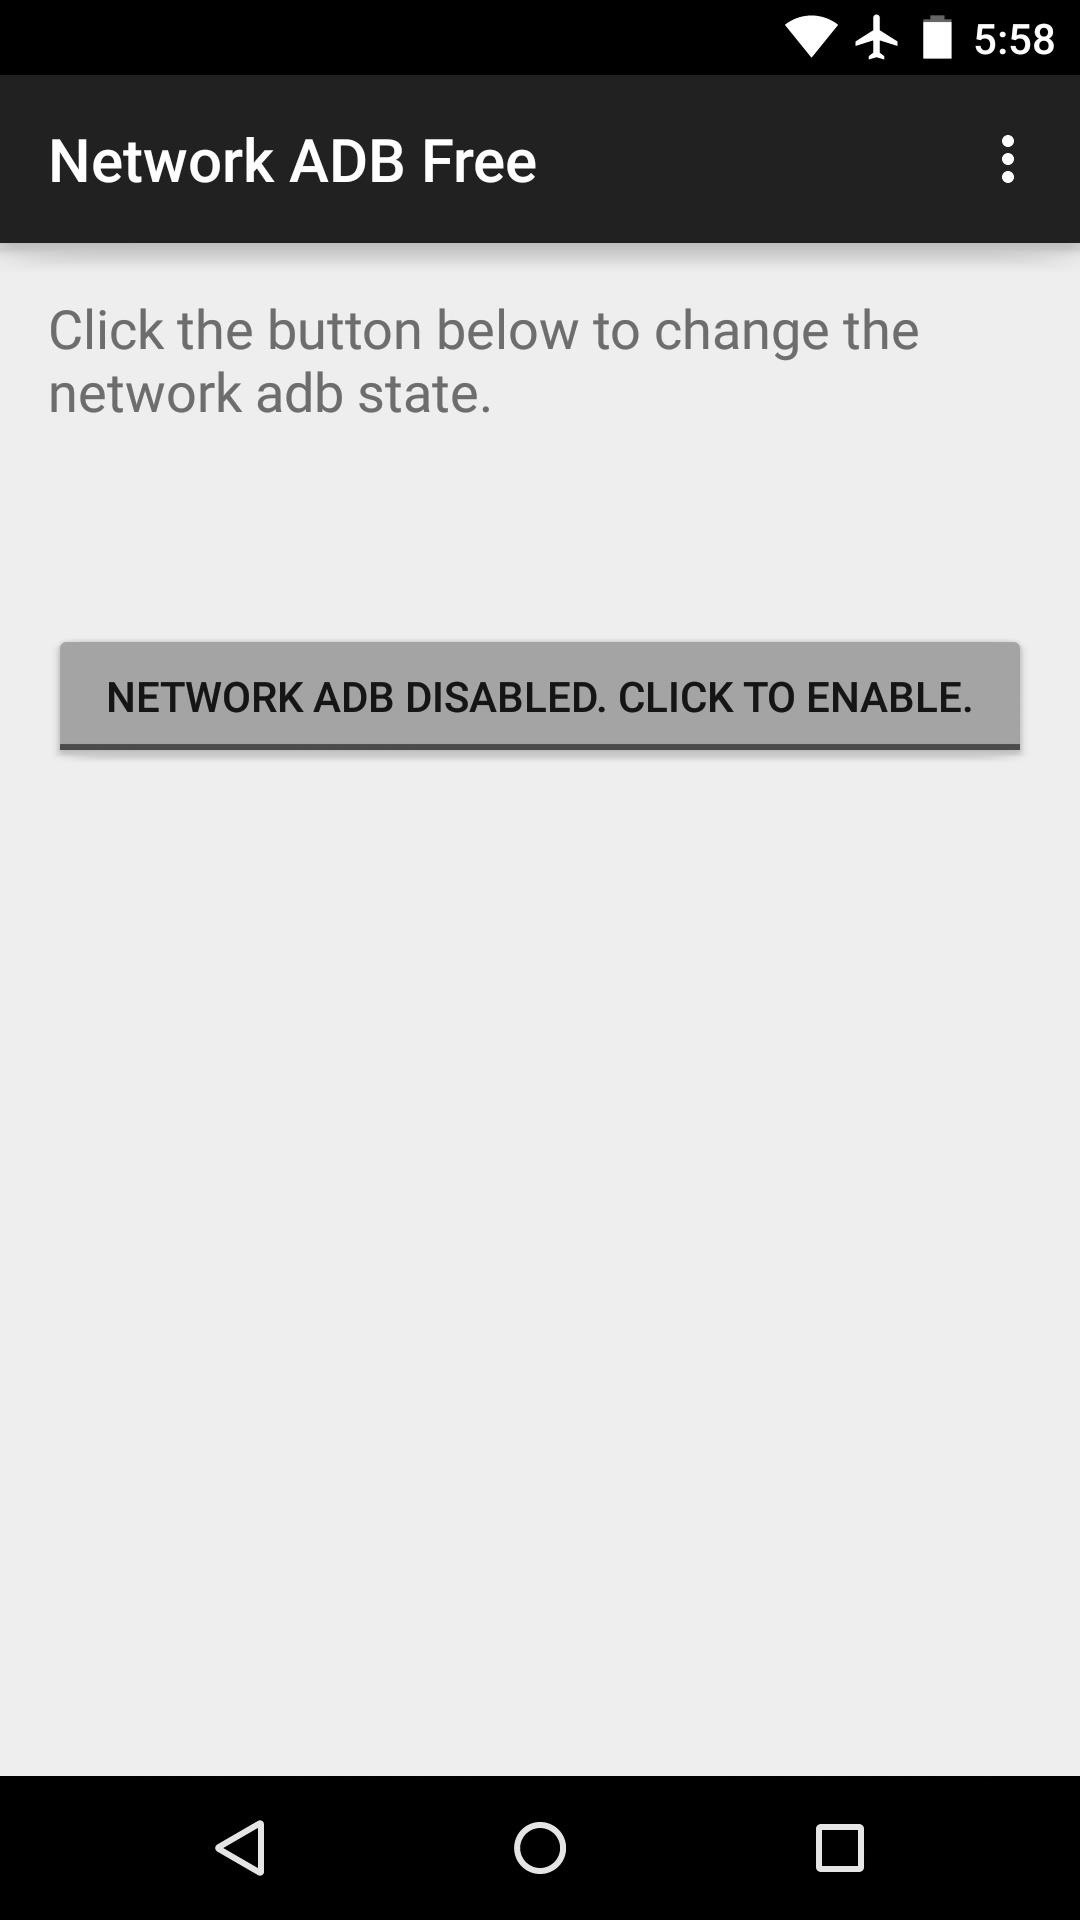 How to Send ADB Commands Over Wi-Fi on Android